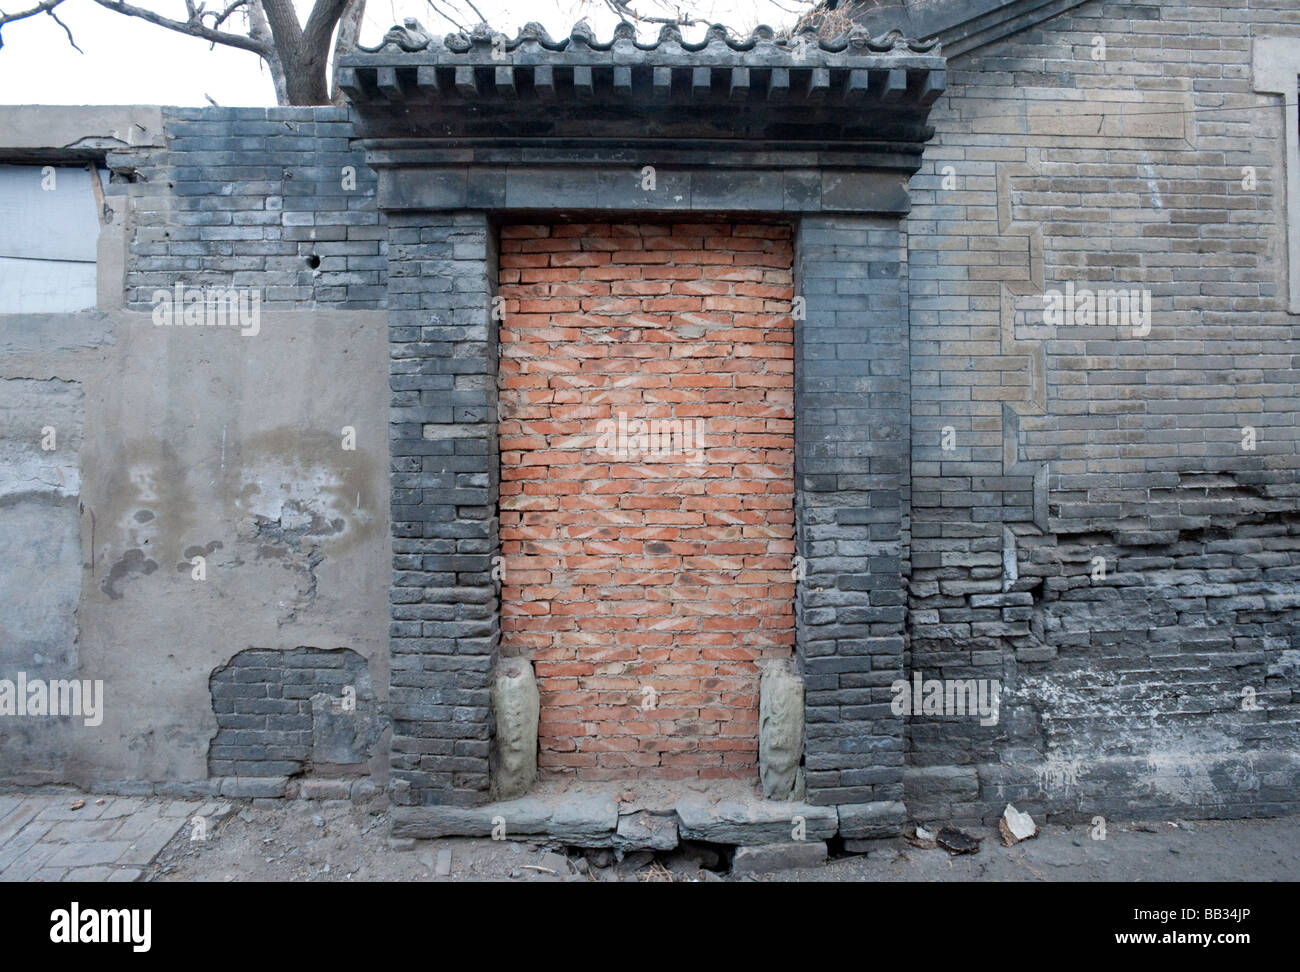 Historic traditional doorway to house in Beijing hutong bricked up prior to demolition in area undergoing redevelopment Stock Photo